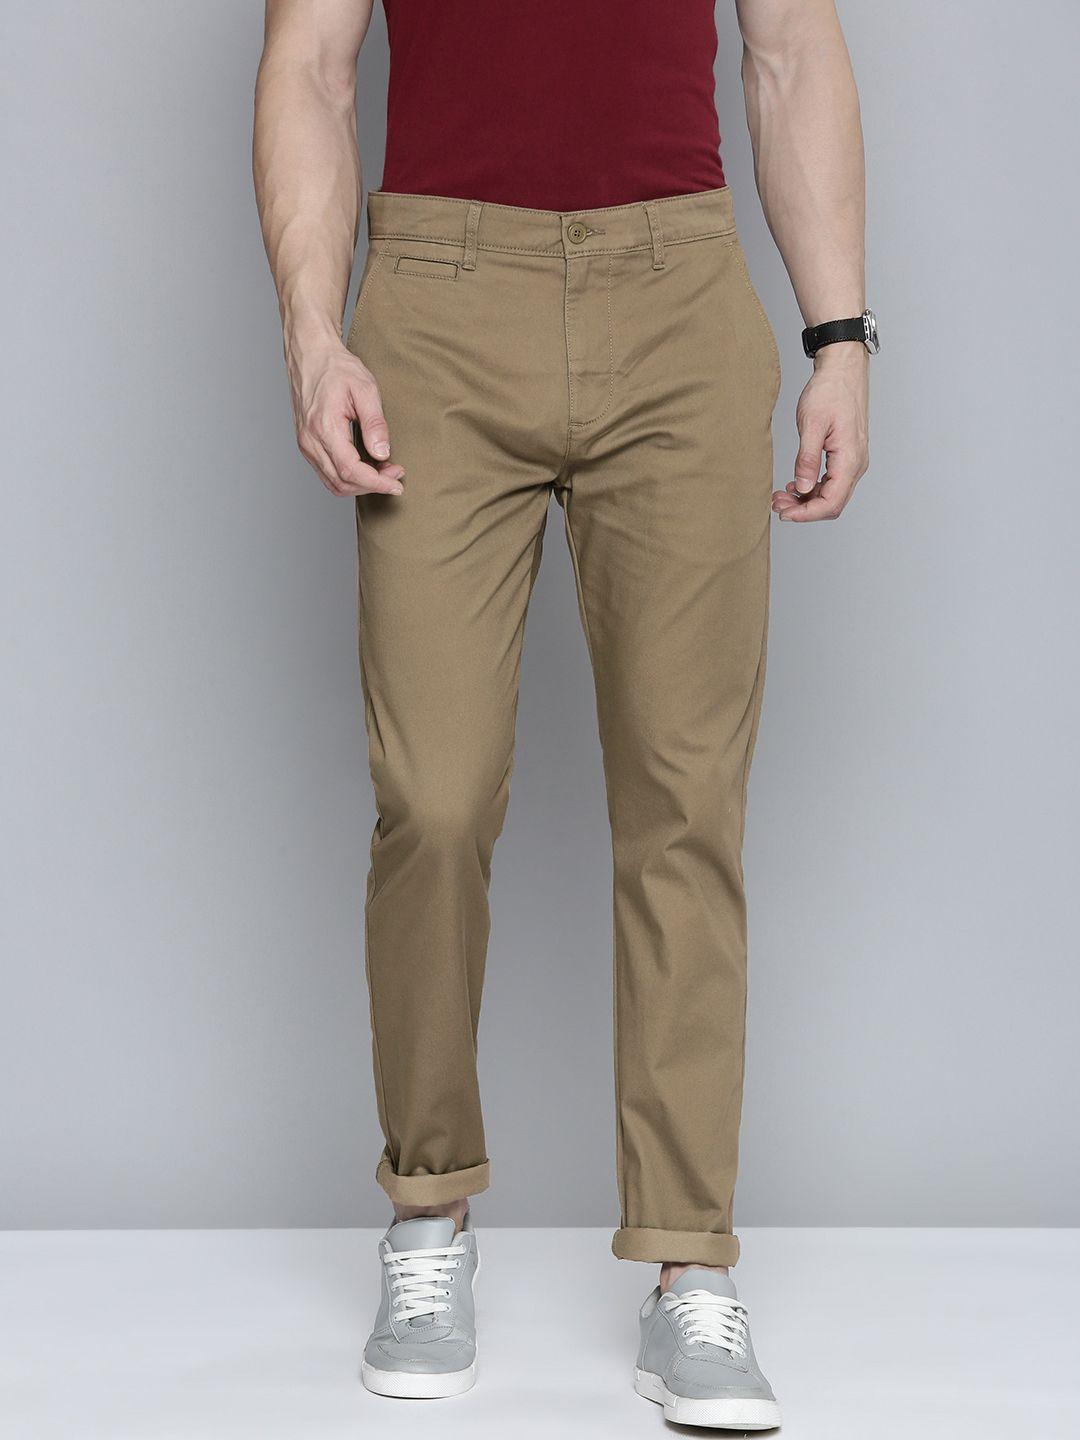 levis-men-olive-green-slim-fit-chino-trousers